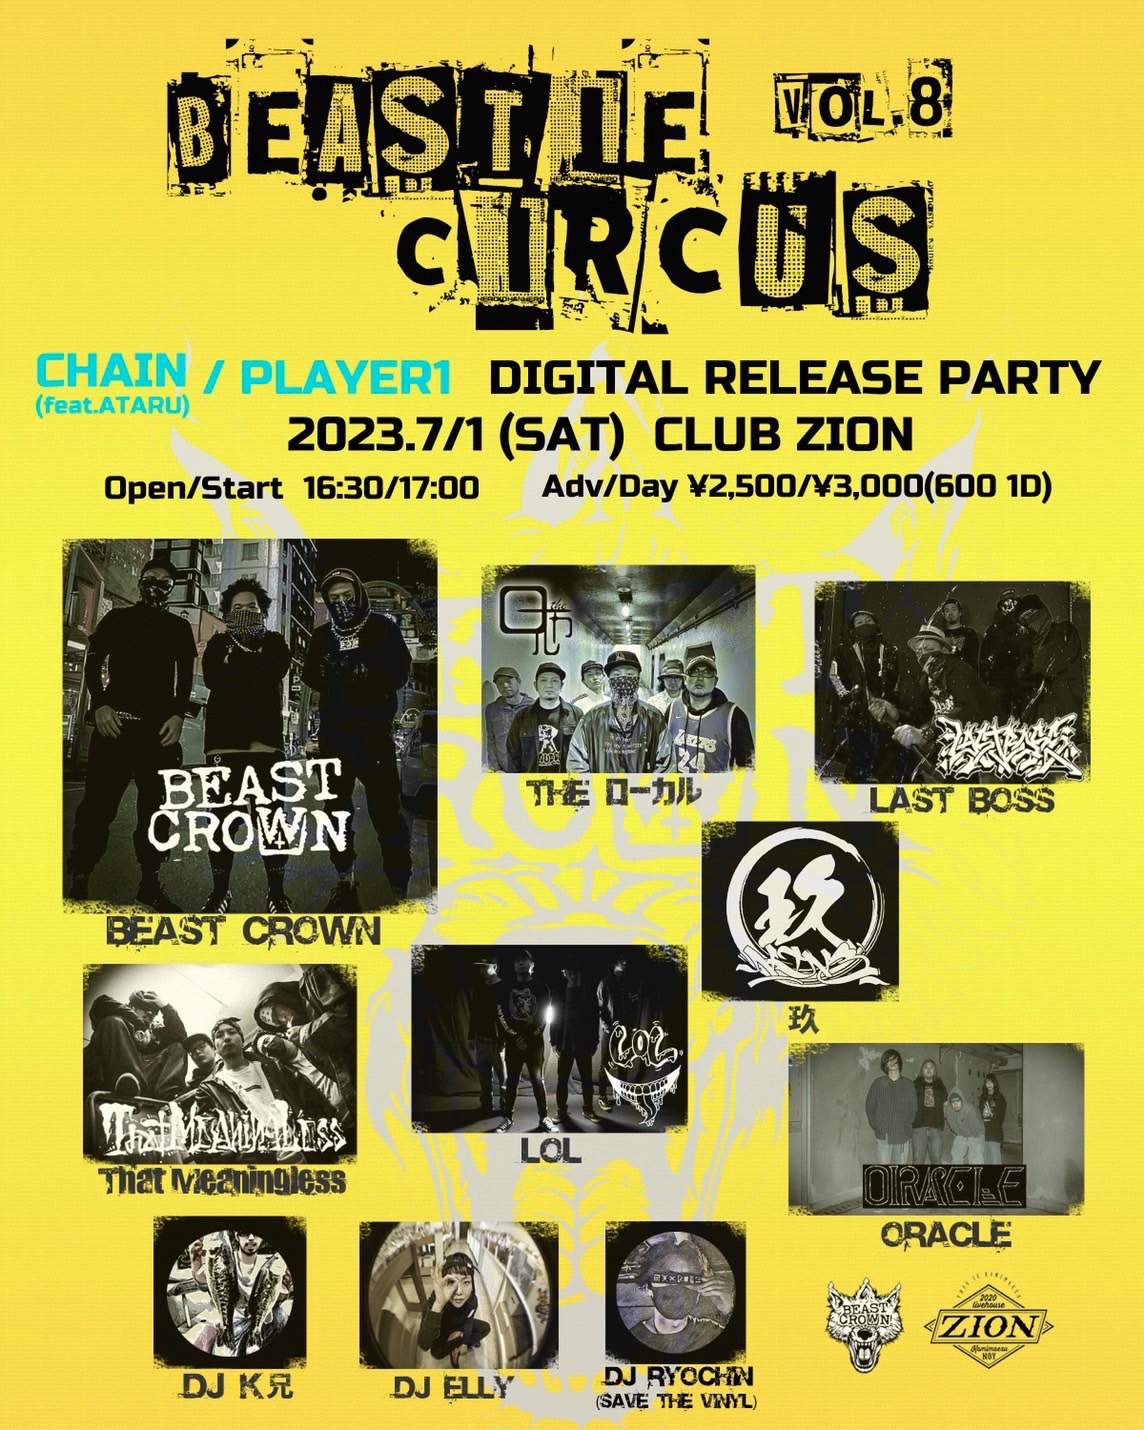 Decasion pre. 「Hellish Sight」vol.7 Otus "Morgue" Release Show in Nagoya